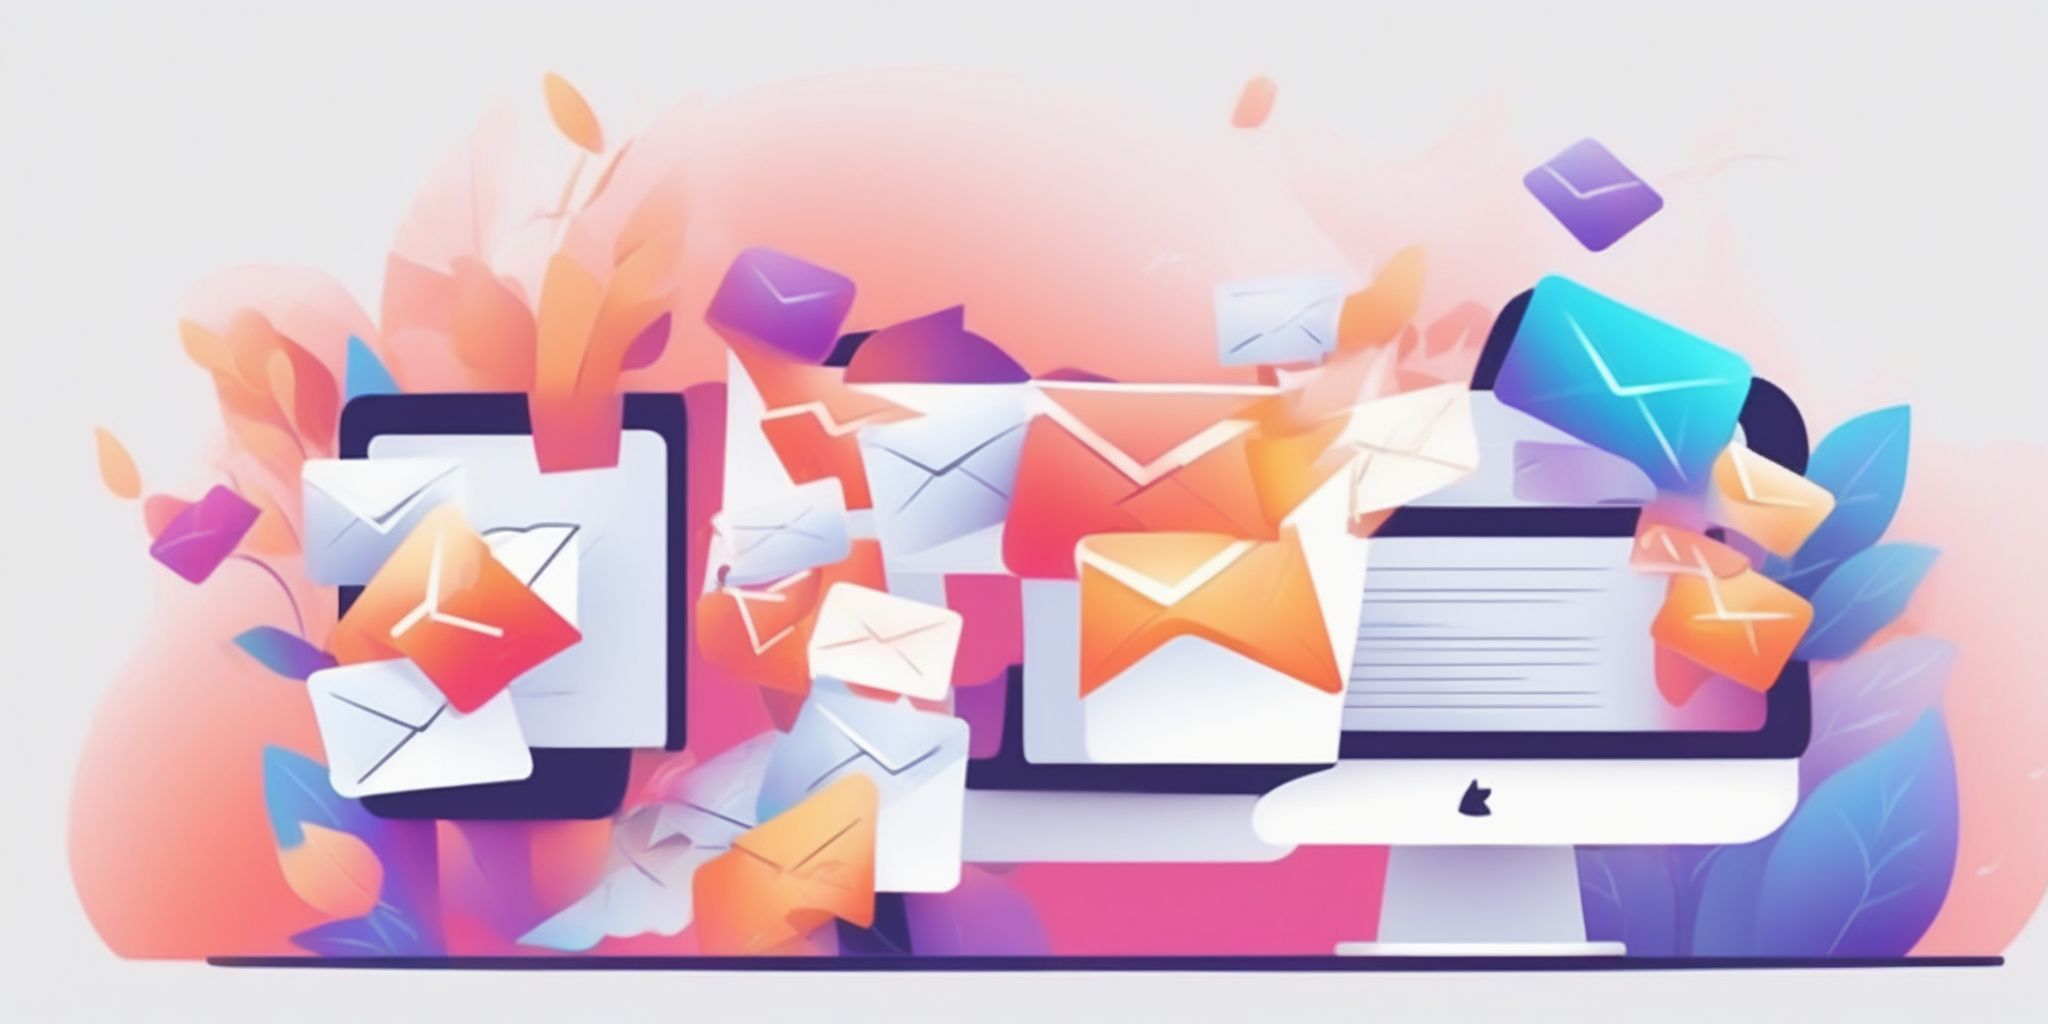 email in illustration style with gradients and white background